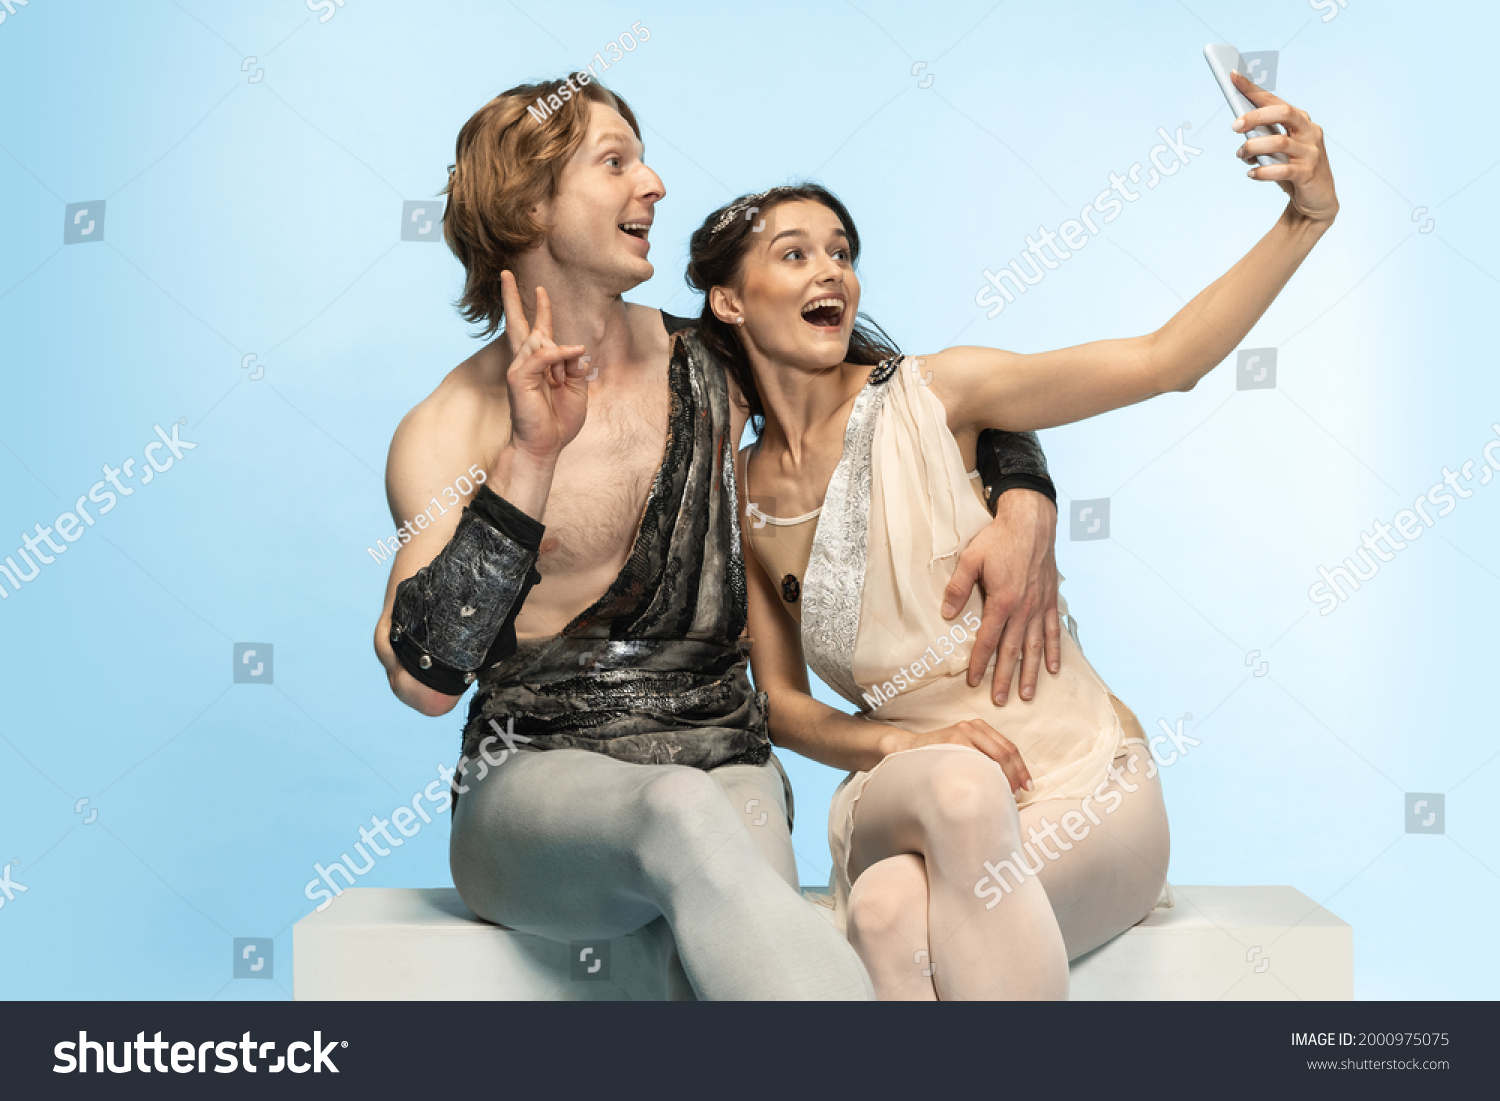 Selfie on mobile phone. Young couple of ballet dancers in ancient Rome costums at blue studio as modern man, woman. Historical character, creative, classical art, humor and comparison of eras concept. #2000975075